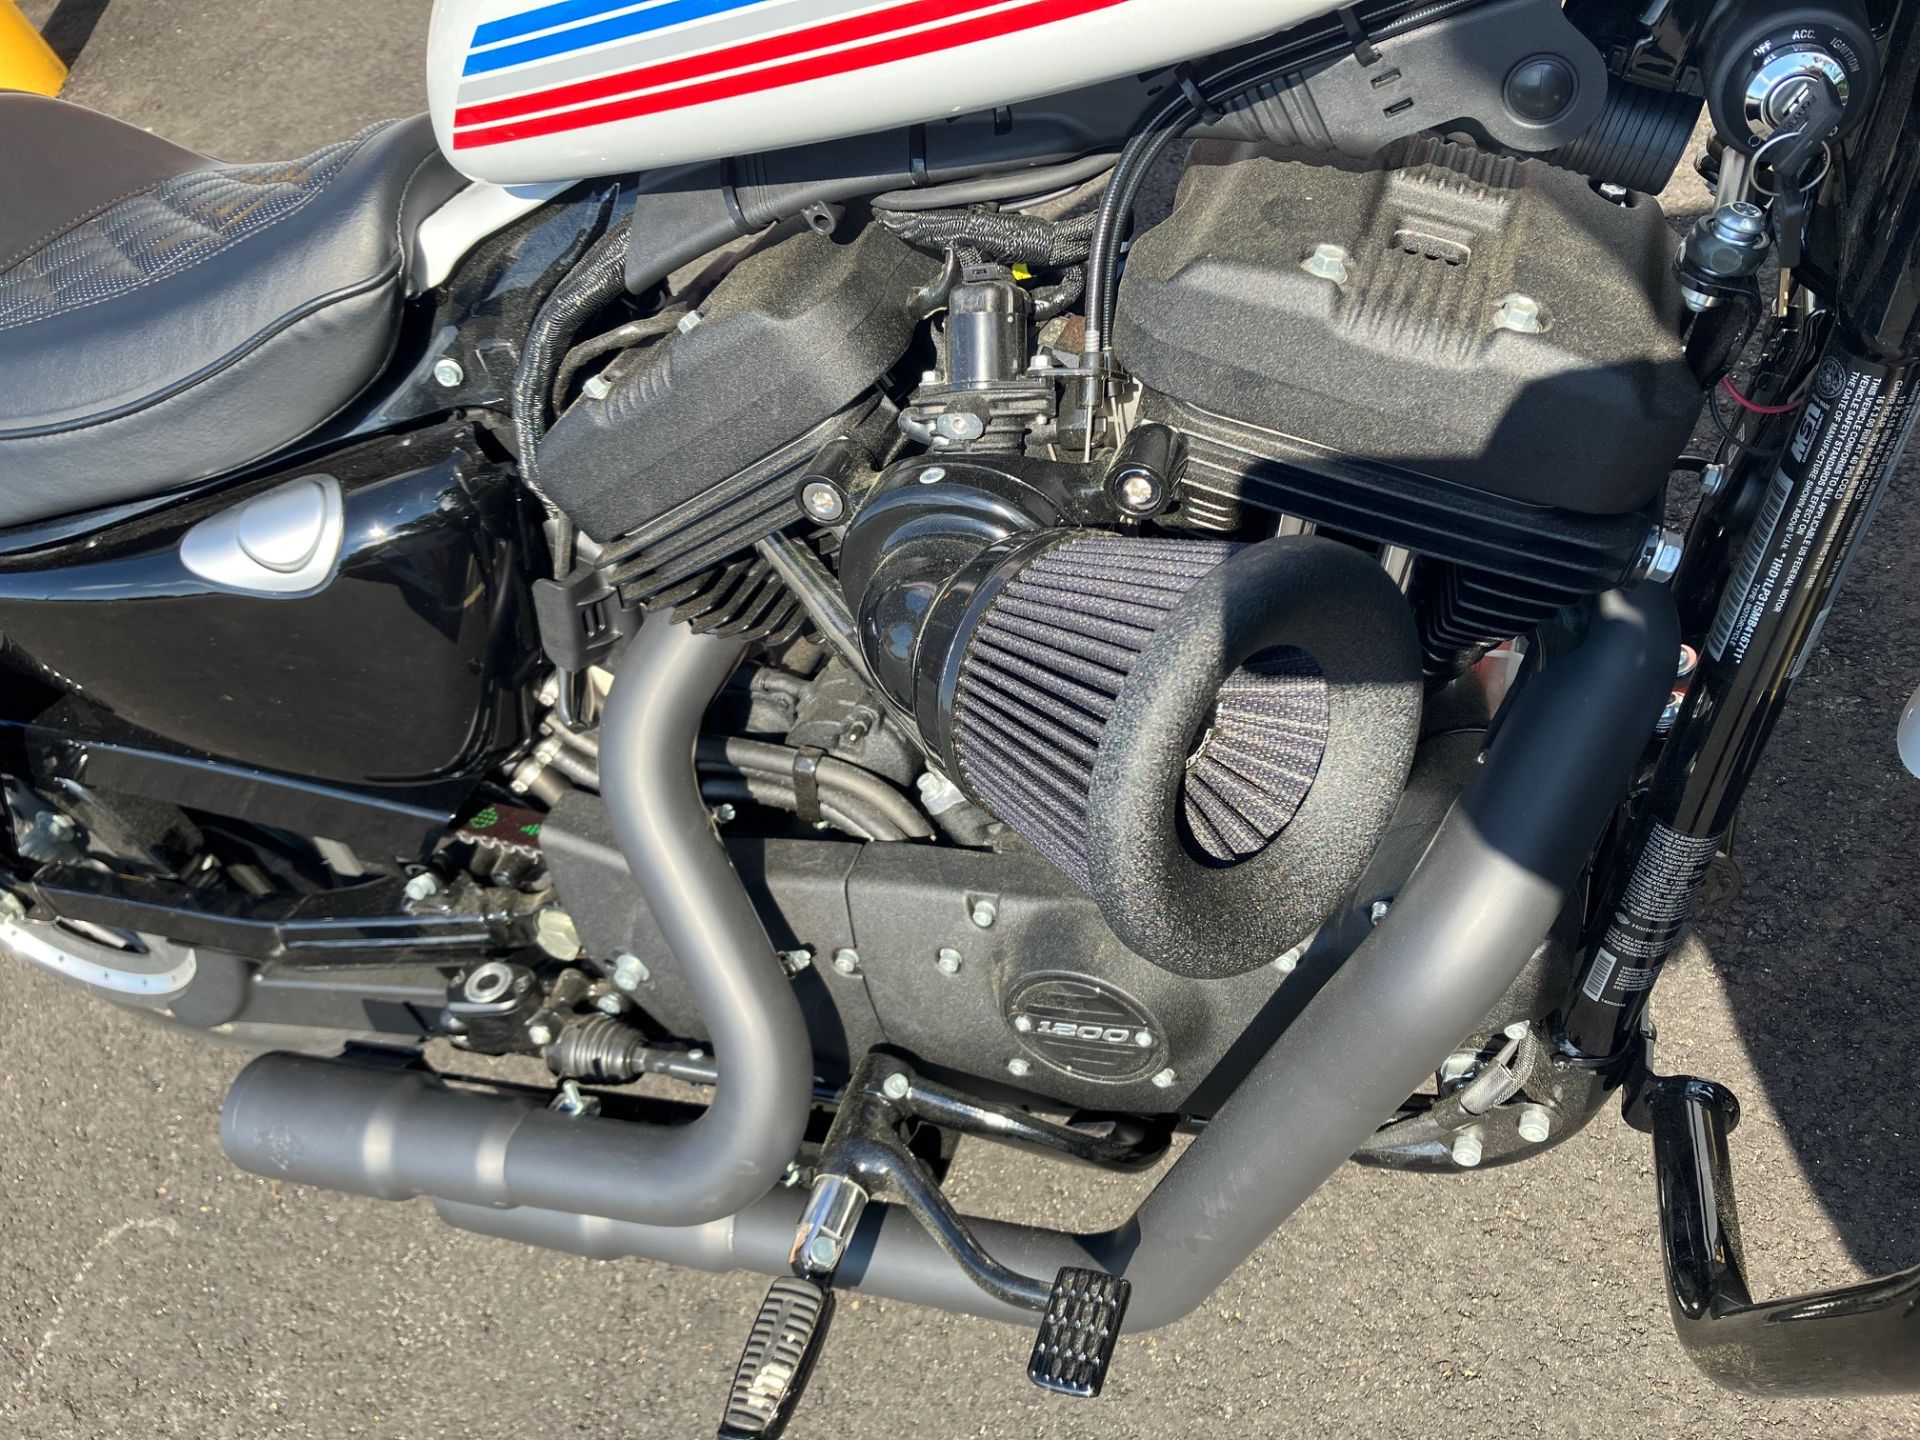 2021 Harley-Davidson Iron 1200™ in West Long Branch, New Jersey - Photo 9